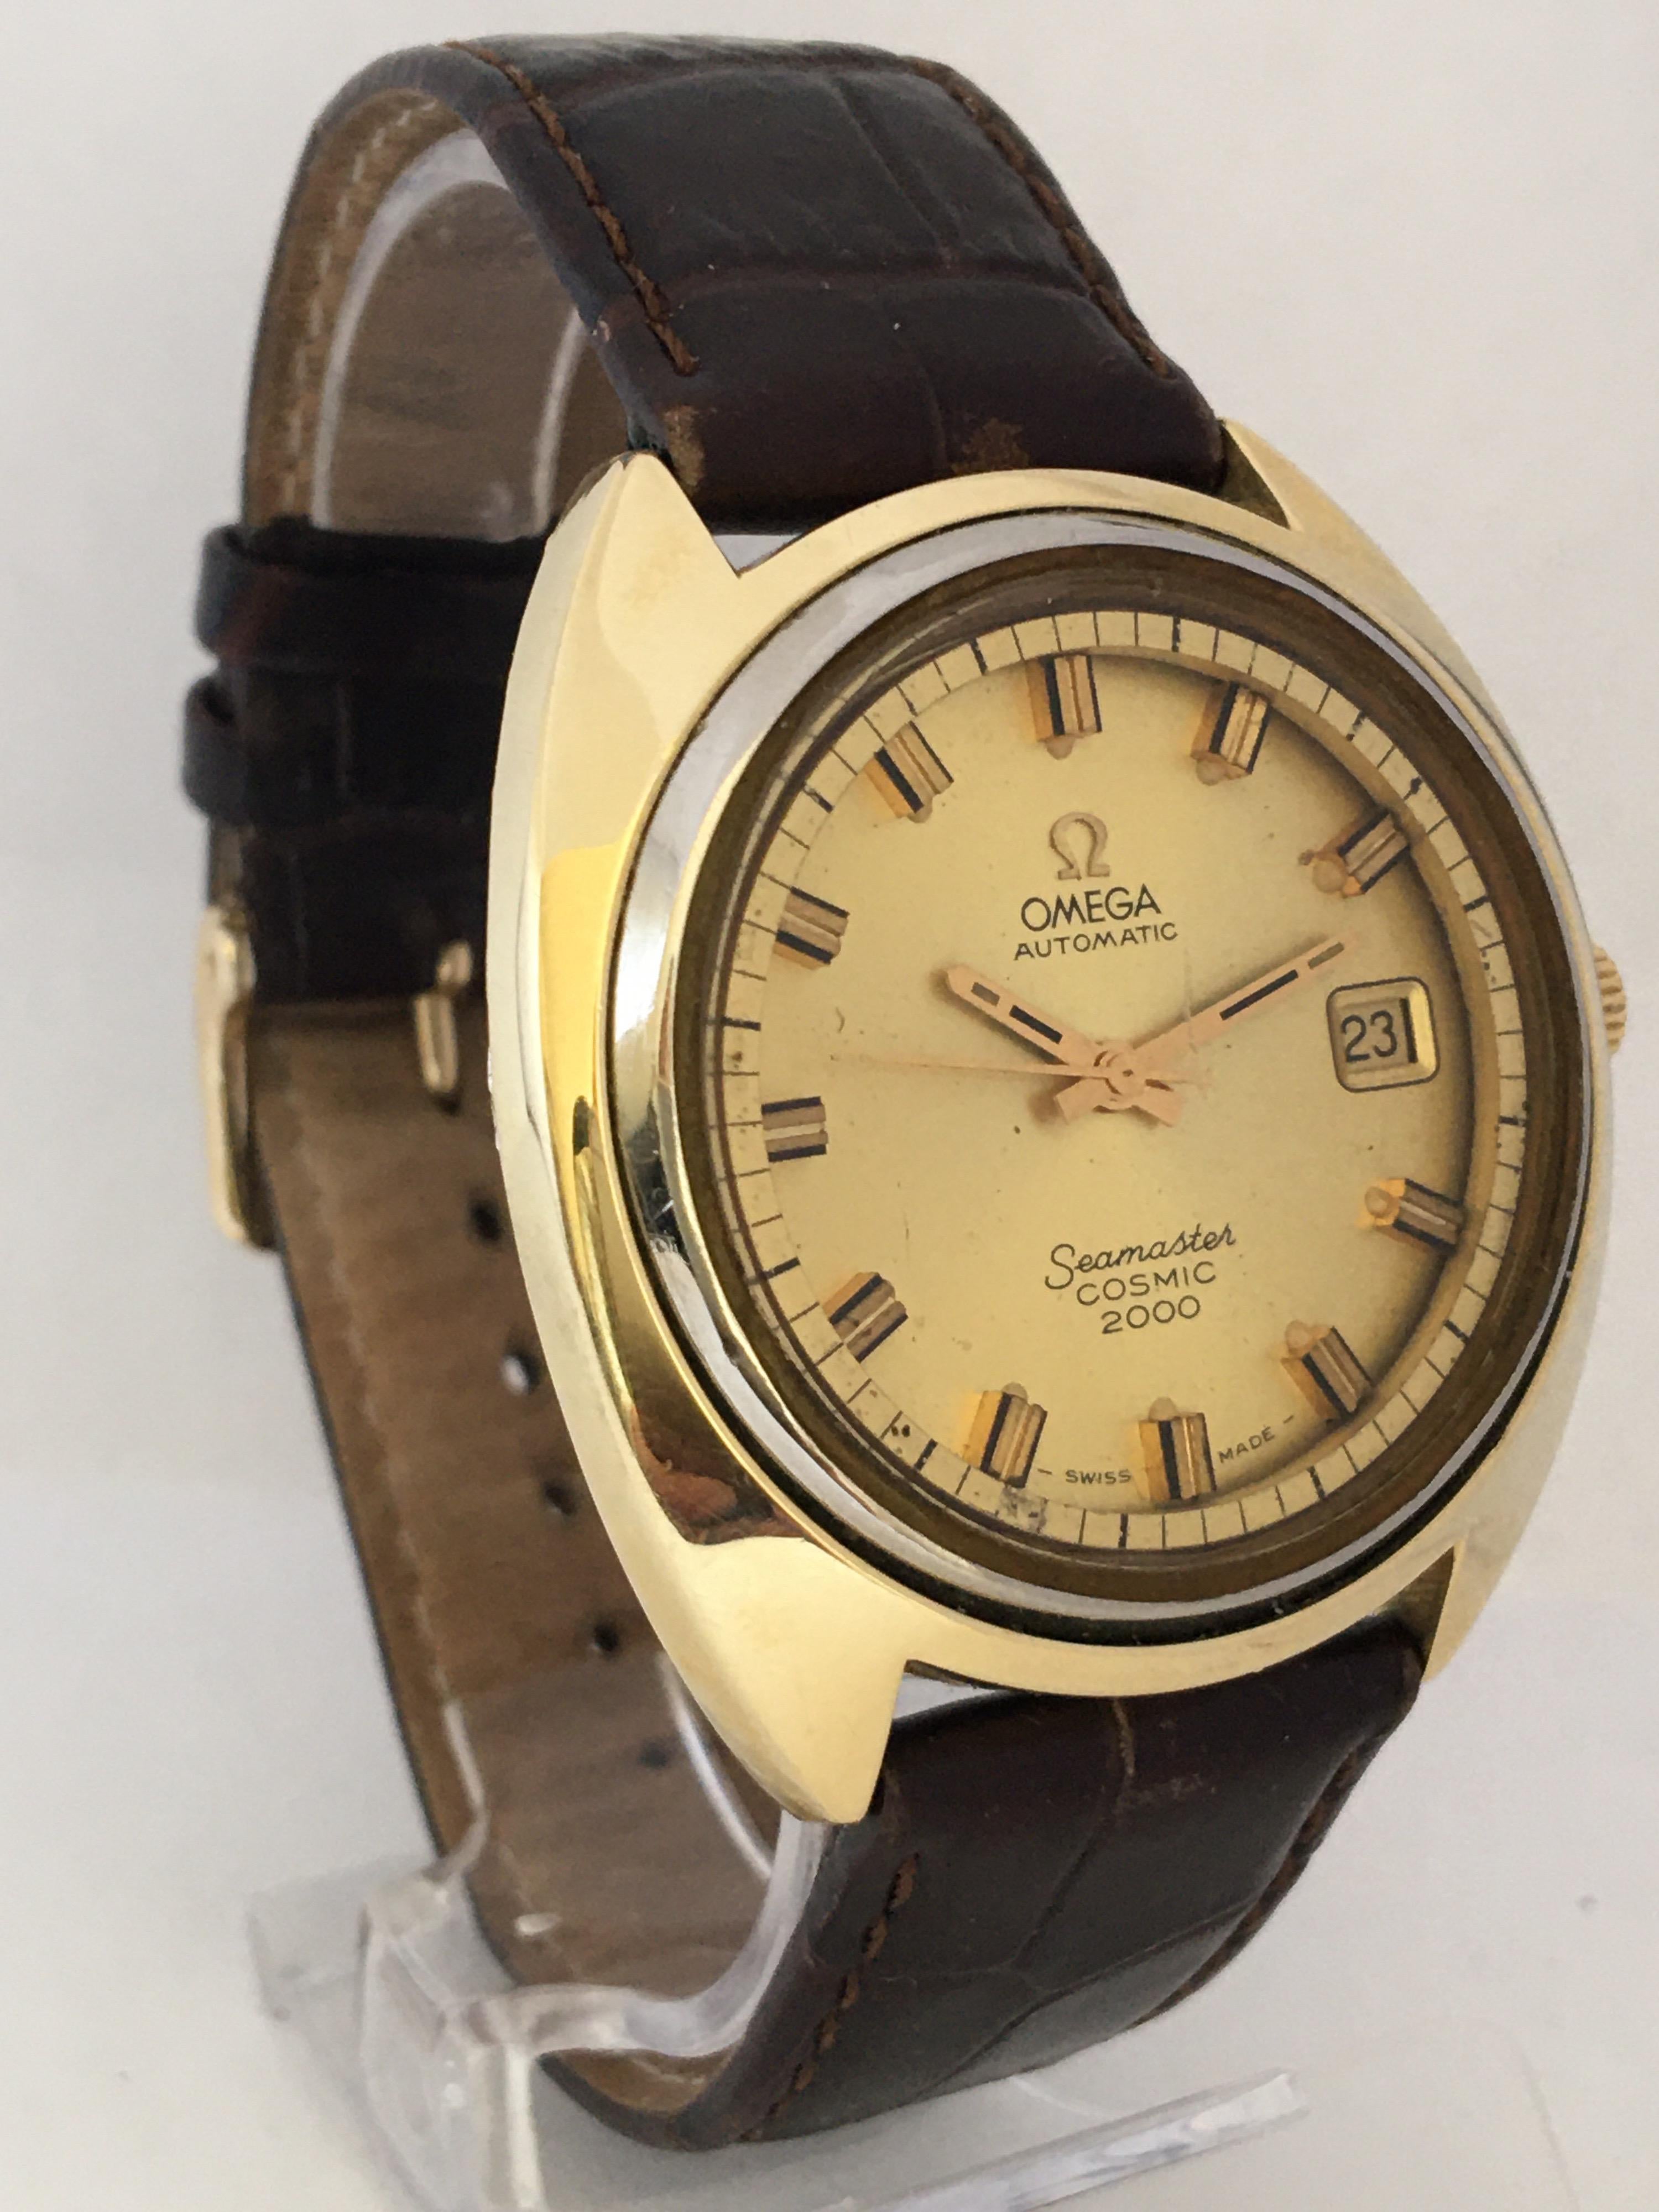 This charming pre-owned vintage automatic Watch is in good working condition and it is running well with a good time keeping. Visible scratch on the glass and small scratches on the stainless steel back. There is a visible tiny gap between the watch